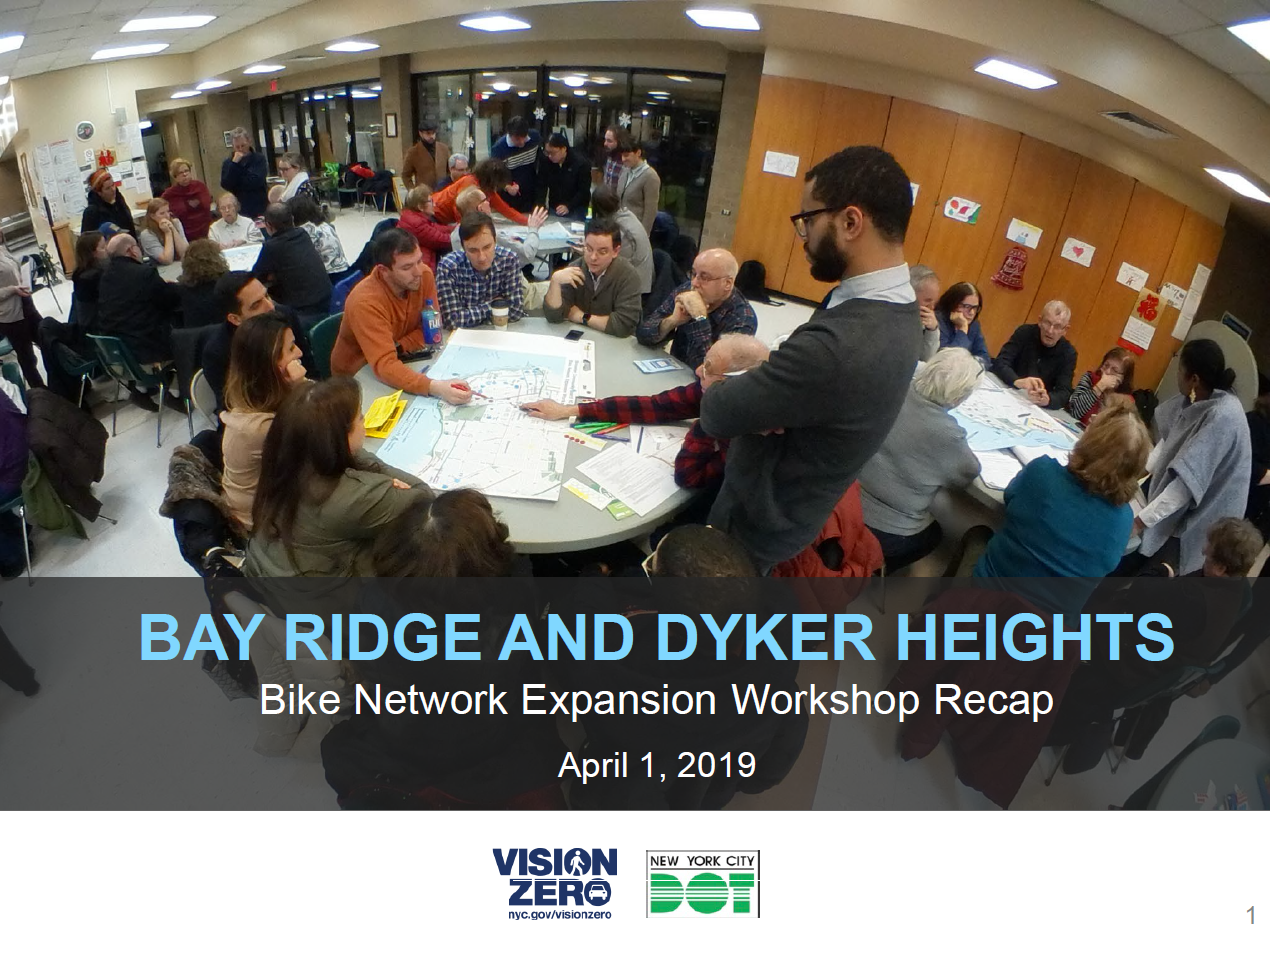 The Bike Network Expansion Workshop Recap will be given to the T&T Committee on April 1, 2019